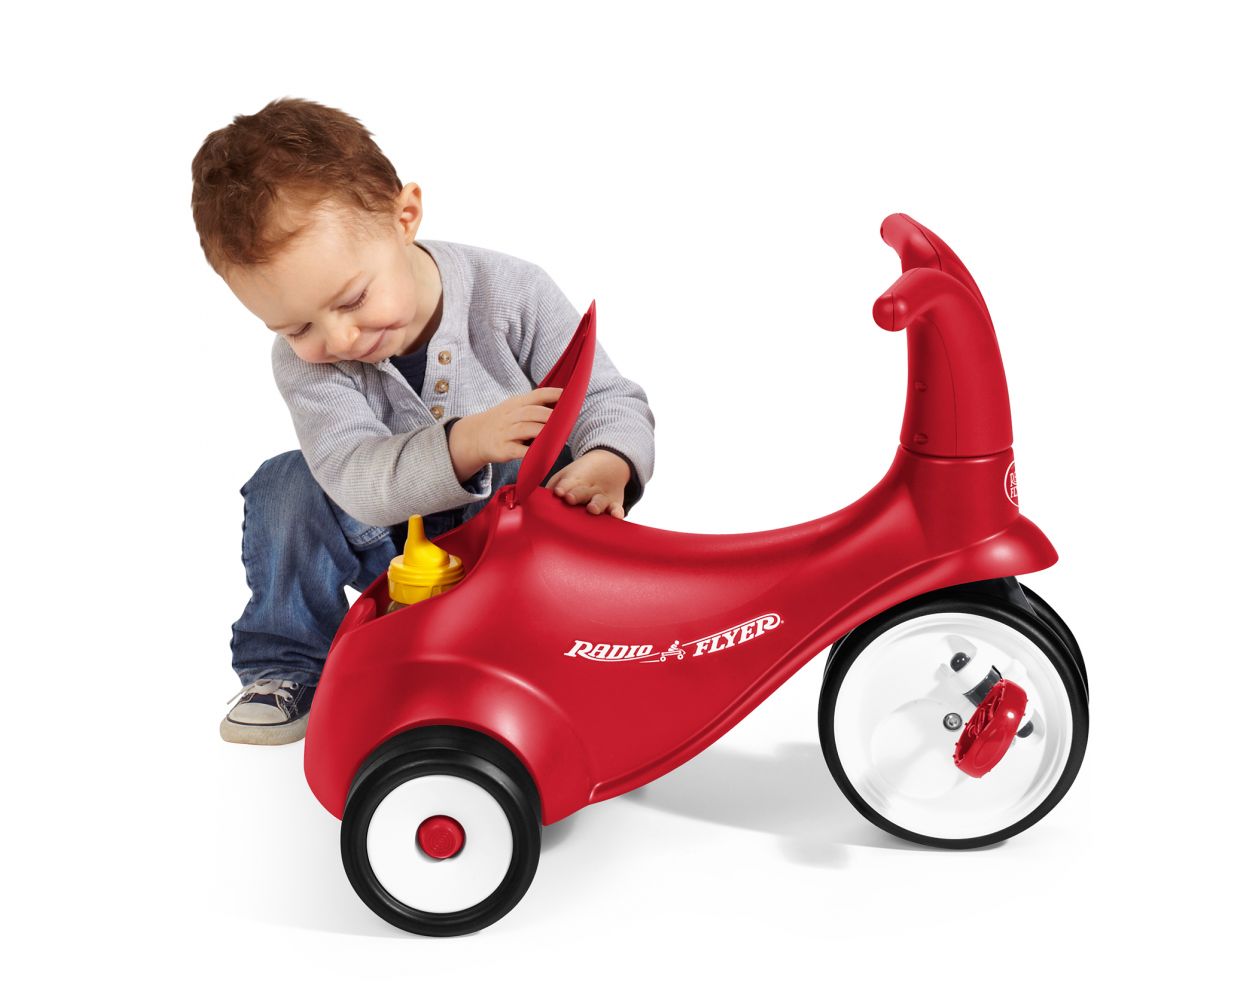 Radio Flyer Scoot 2 Pedal Ride-On Toy Rental